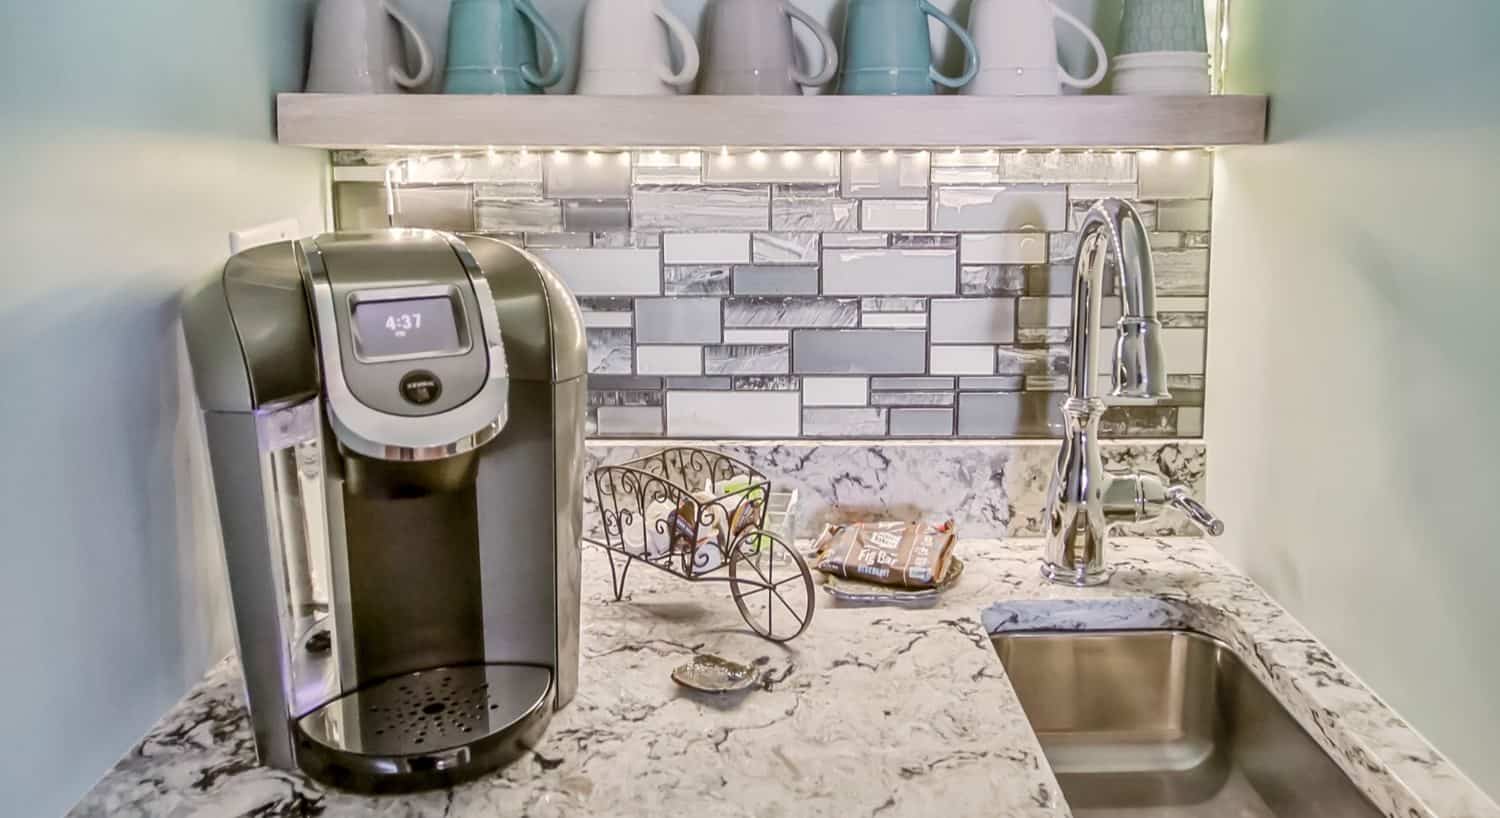 Marble counter top with tiled backsplash, coffee maker, small sink, and gray, white, and teal coffee cups